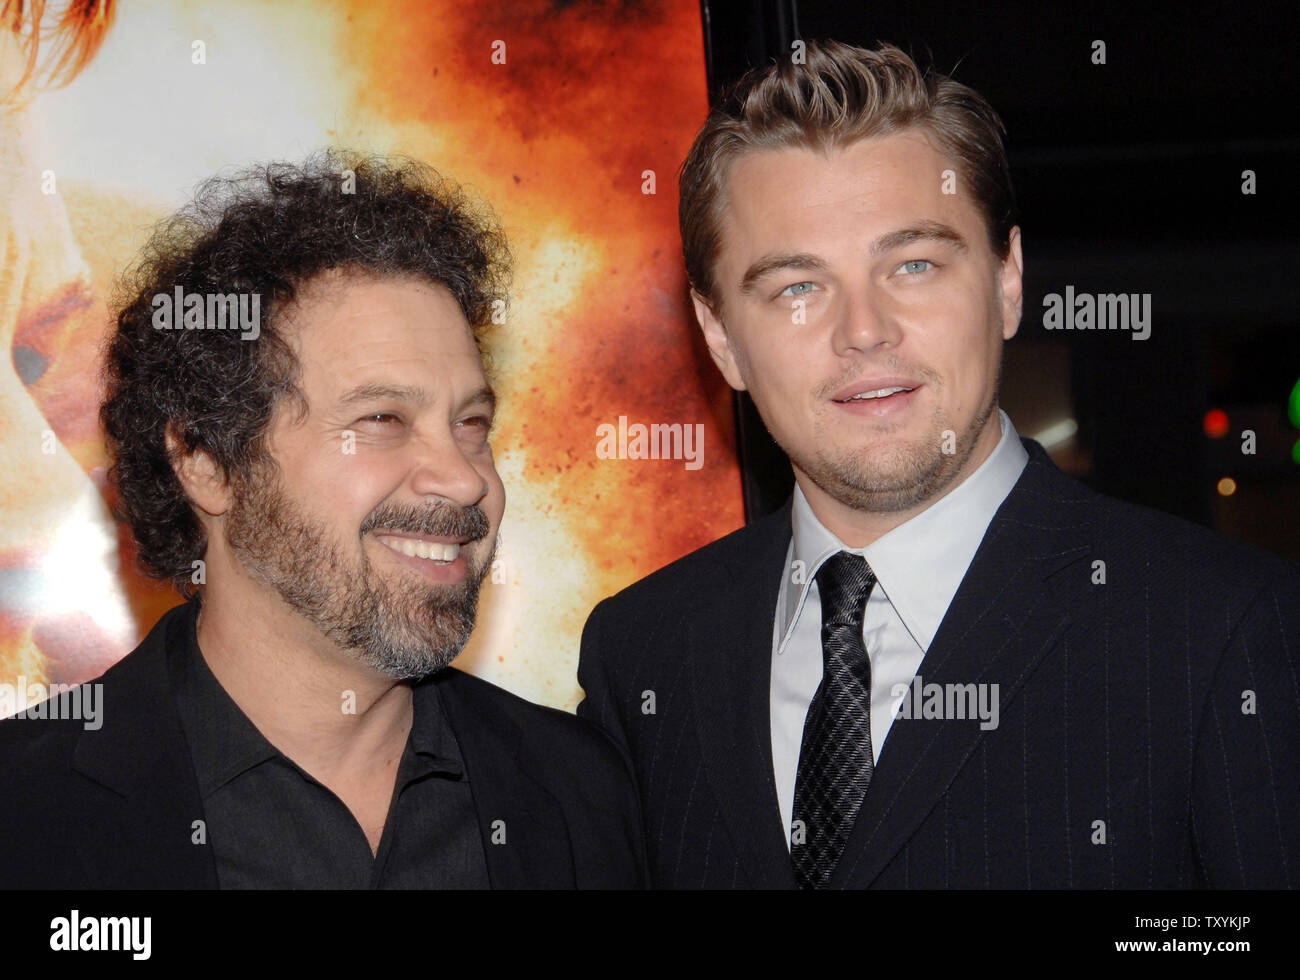 Actor Leonardo DiCaprio (R), star of the new motion picture drama 'Blood Diamond', and director Edward Zwick share a moment during the premiere of the film at Grauman's Chinese Theatre in the Hollywood section of Los Angeles on December 6, 2006. The film, set in Sierra Leone is about a quest to recover a rare diamond. (UPI Photo/Jim Ruymen) Stock Photo